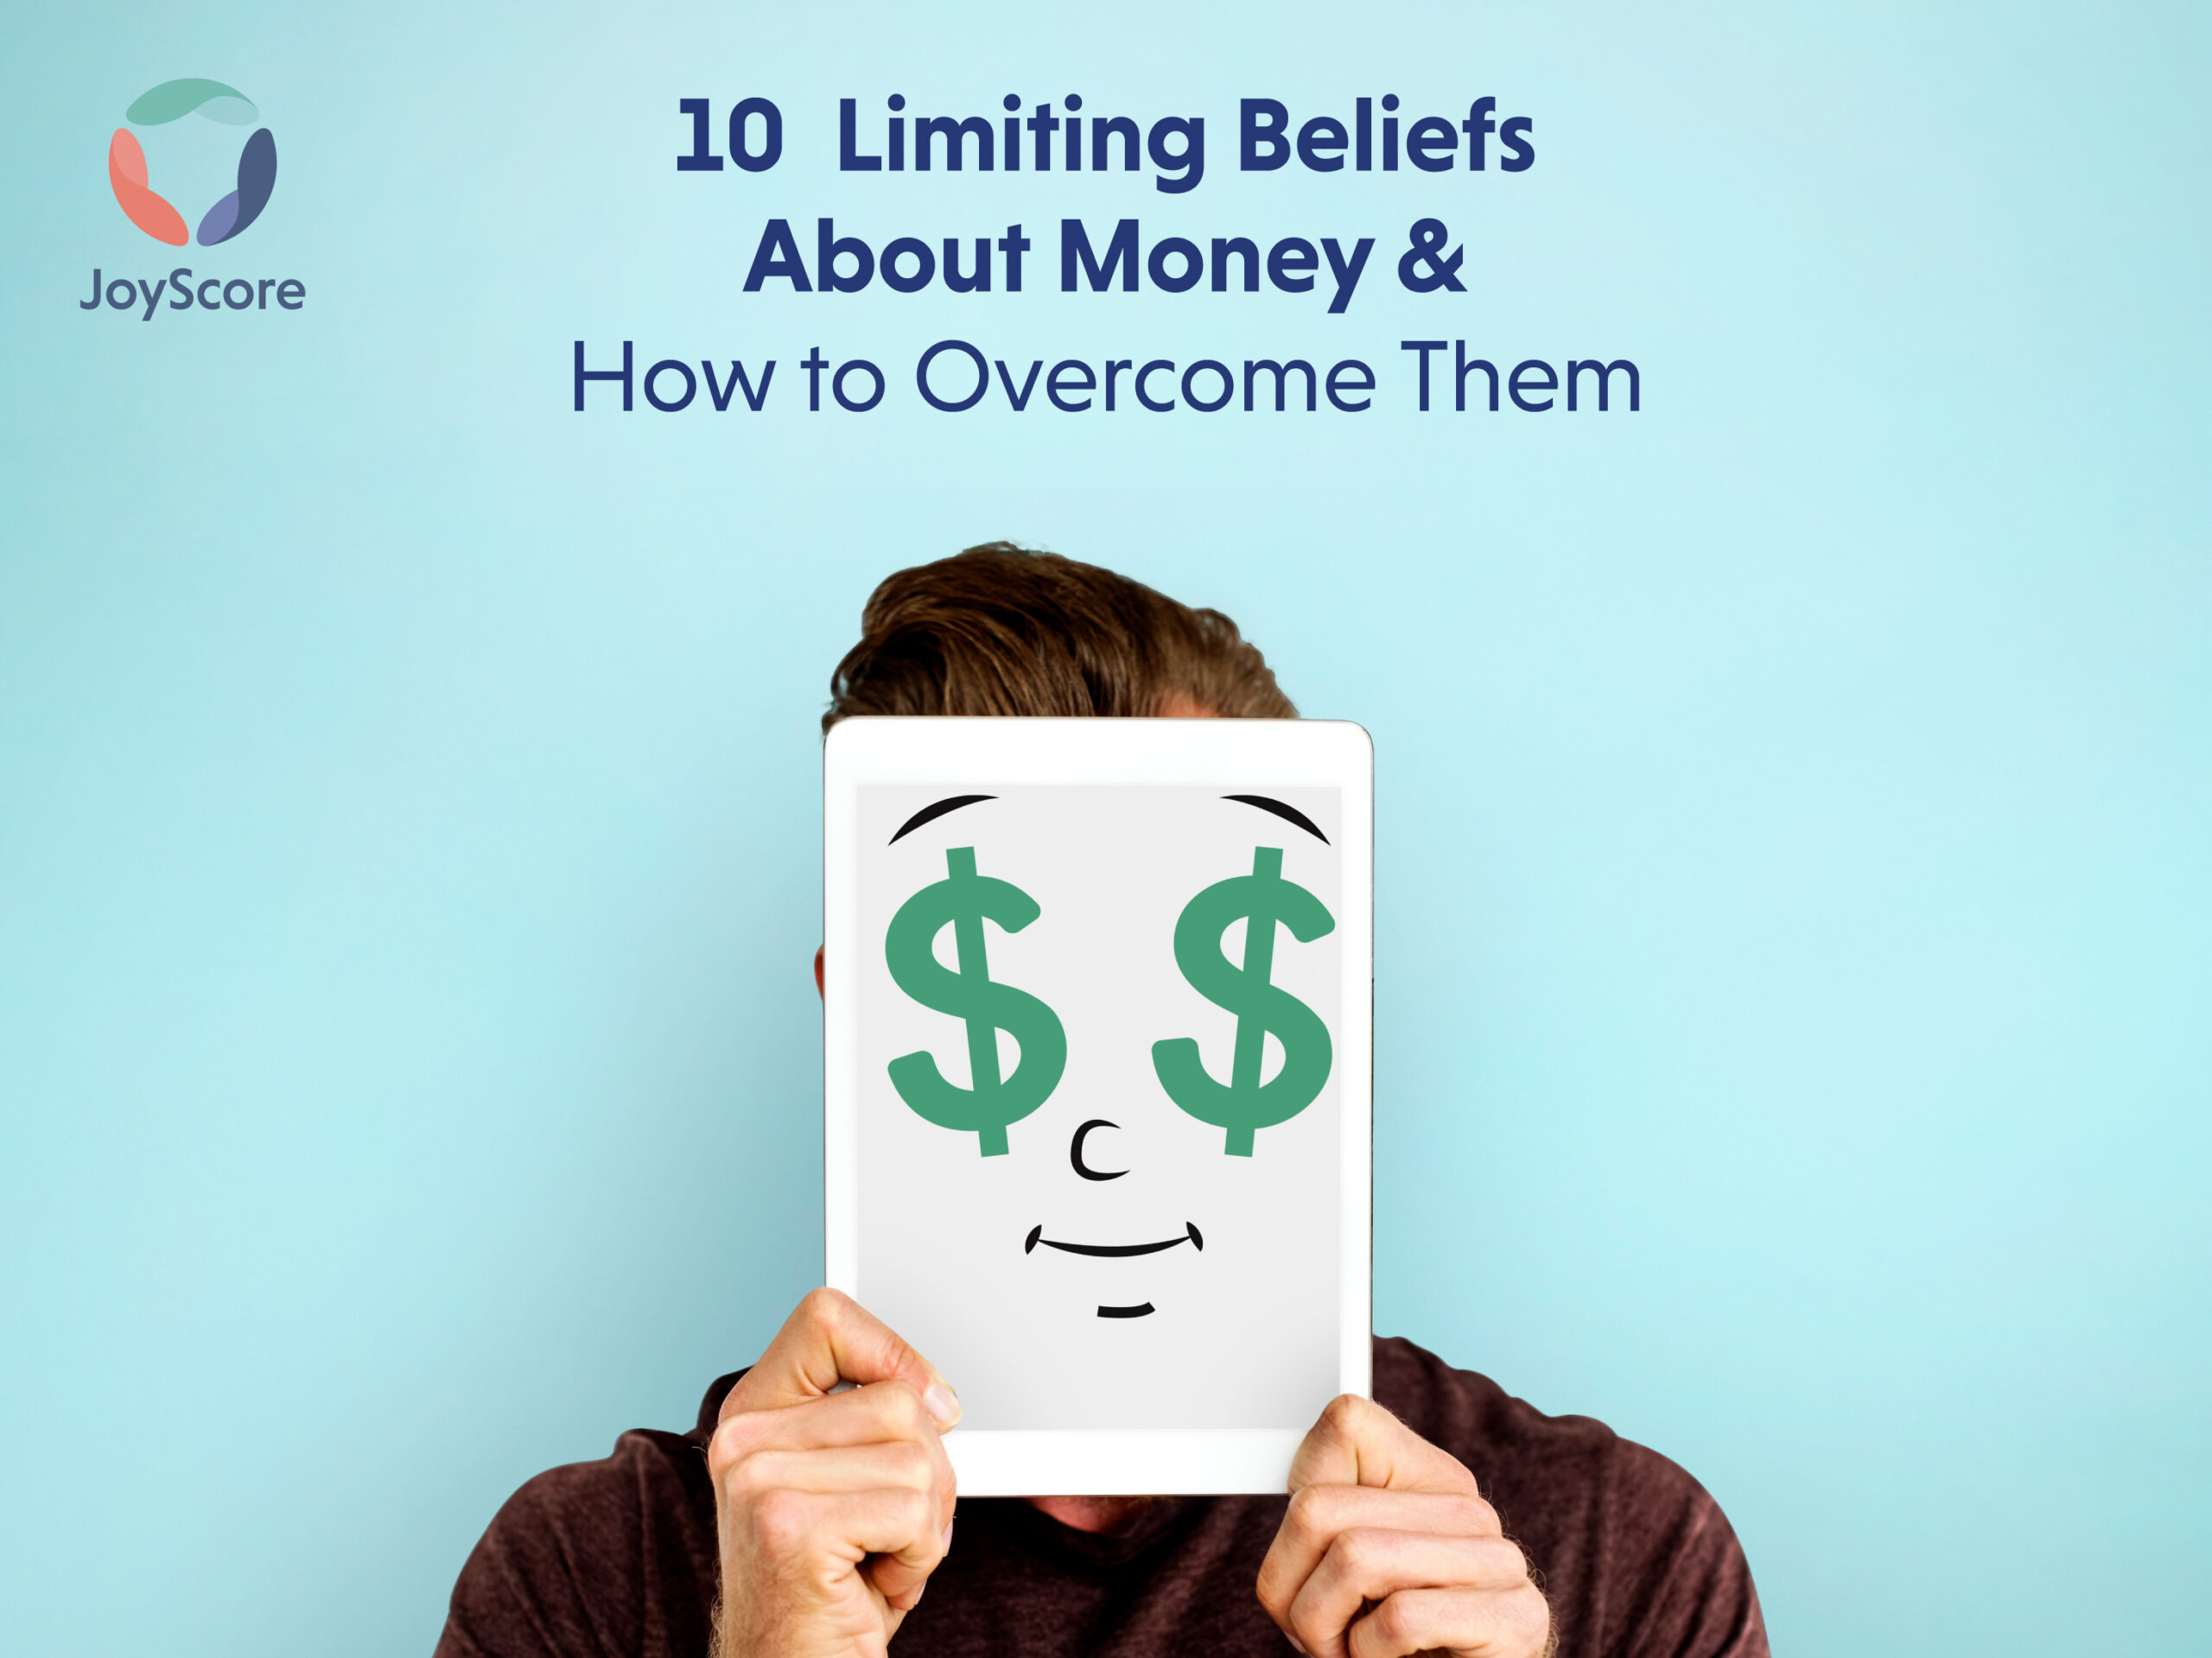 10 Most Common Limiting Beliefs About Money & How to Overcome Them